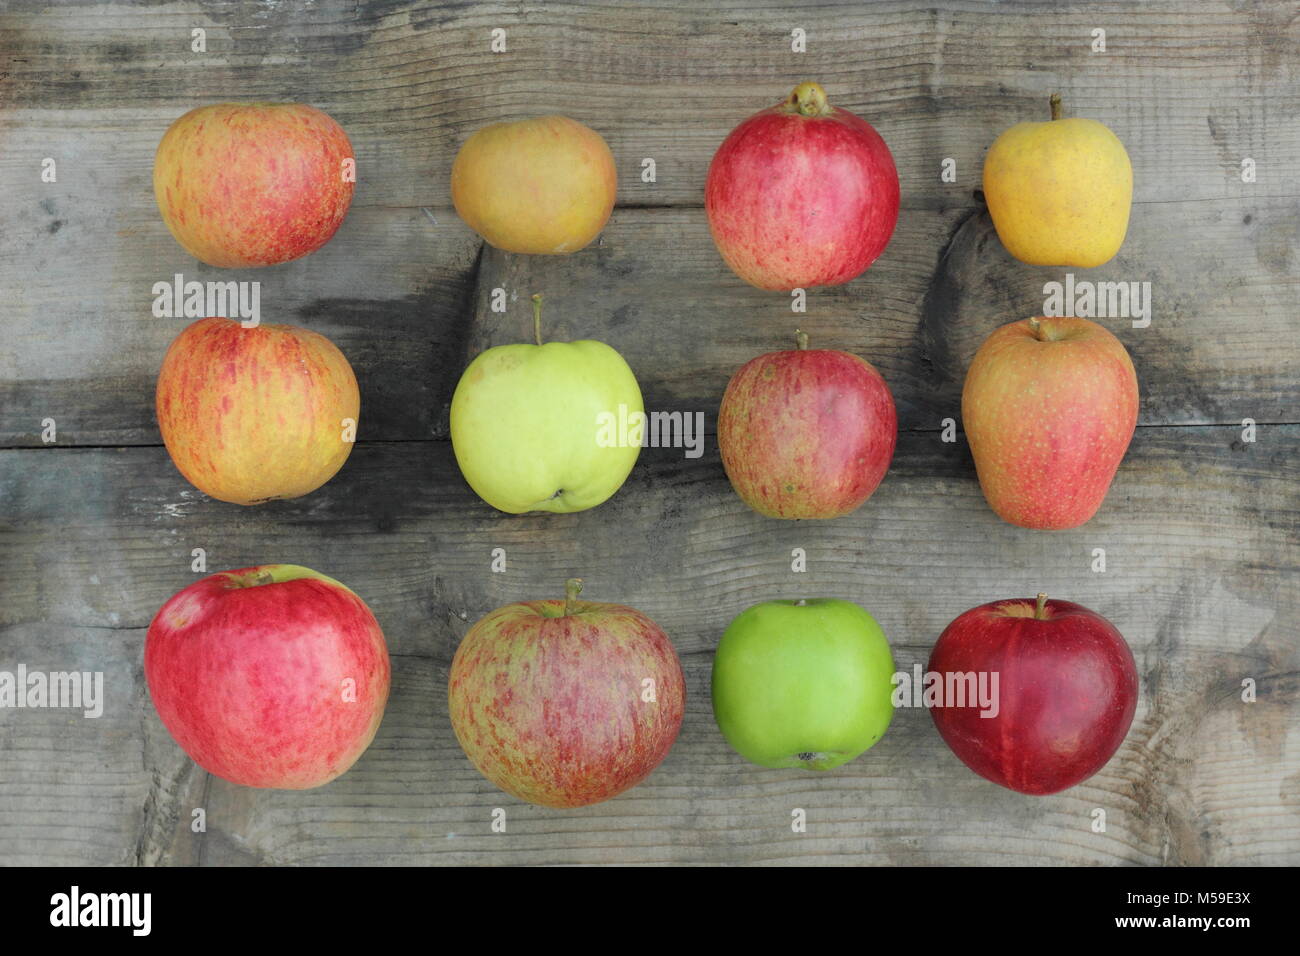 Malus domestica, British apples on wooden crate including Worcester Pearmain, Egremont Russet, Newton Wonder, Pitmaston Pineapple and Ribston Pippin Stock Photo